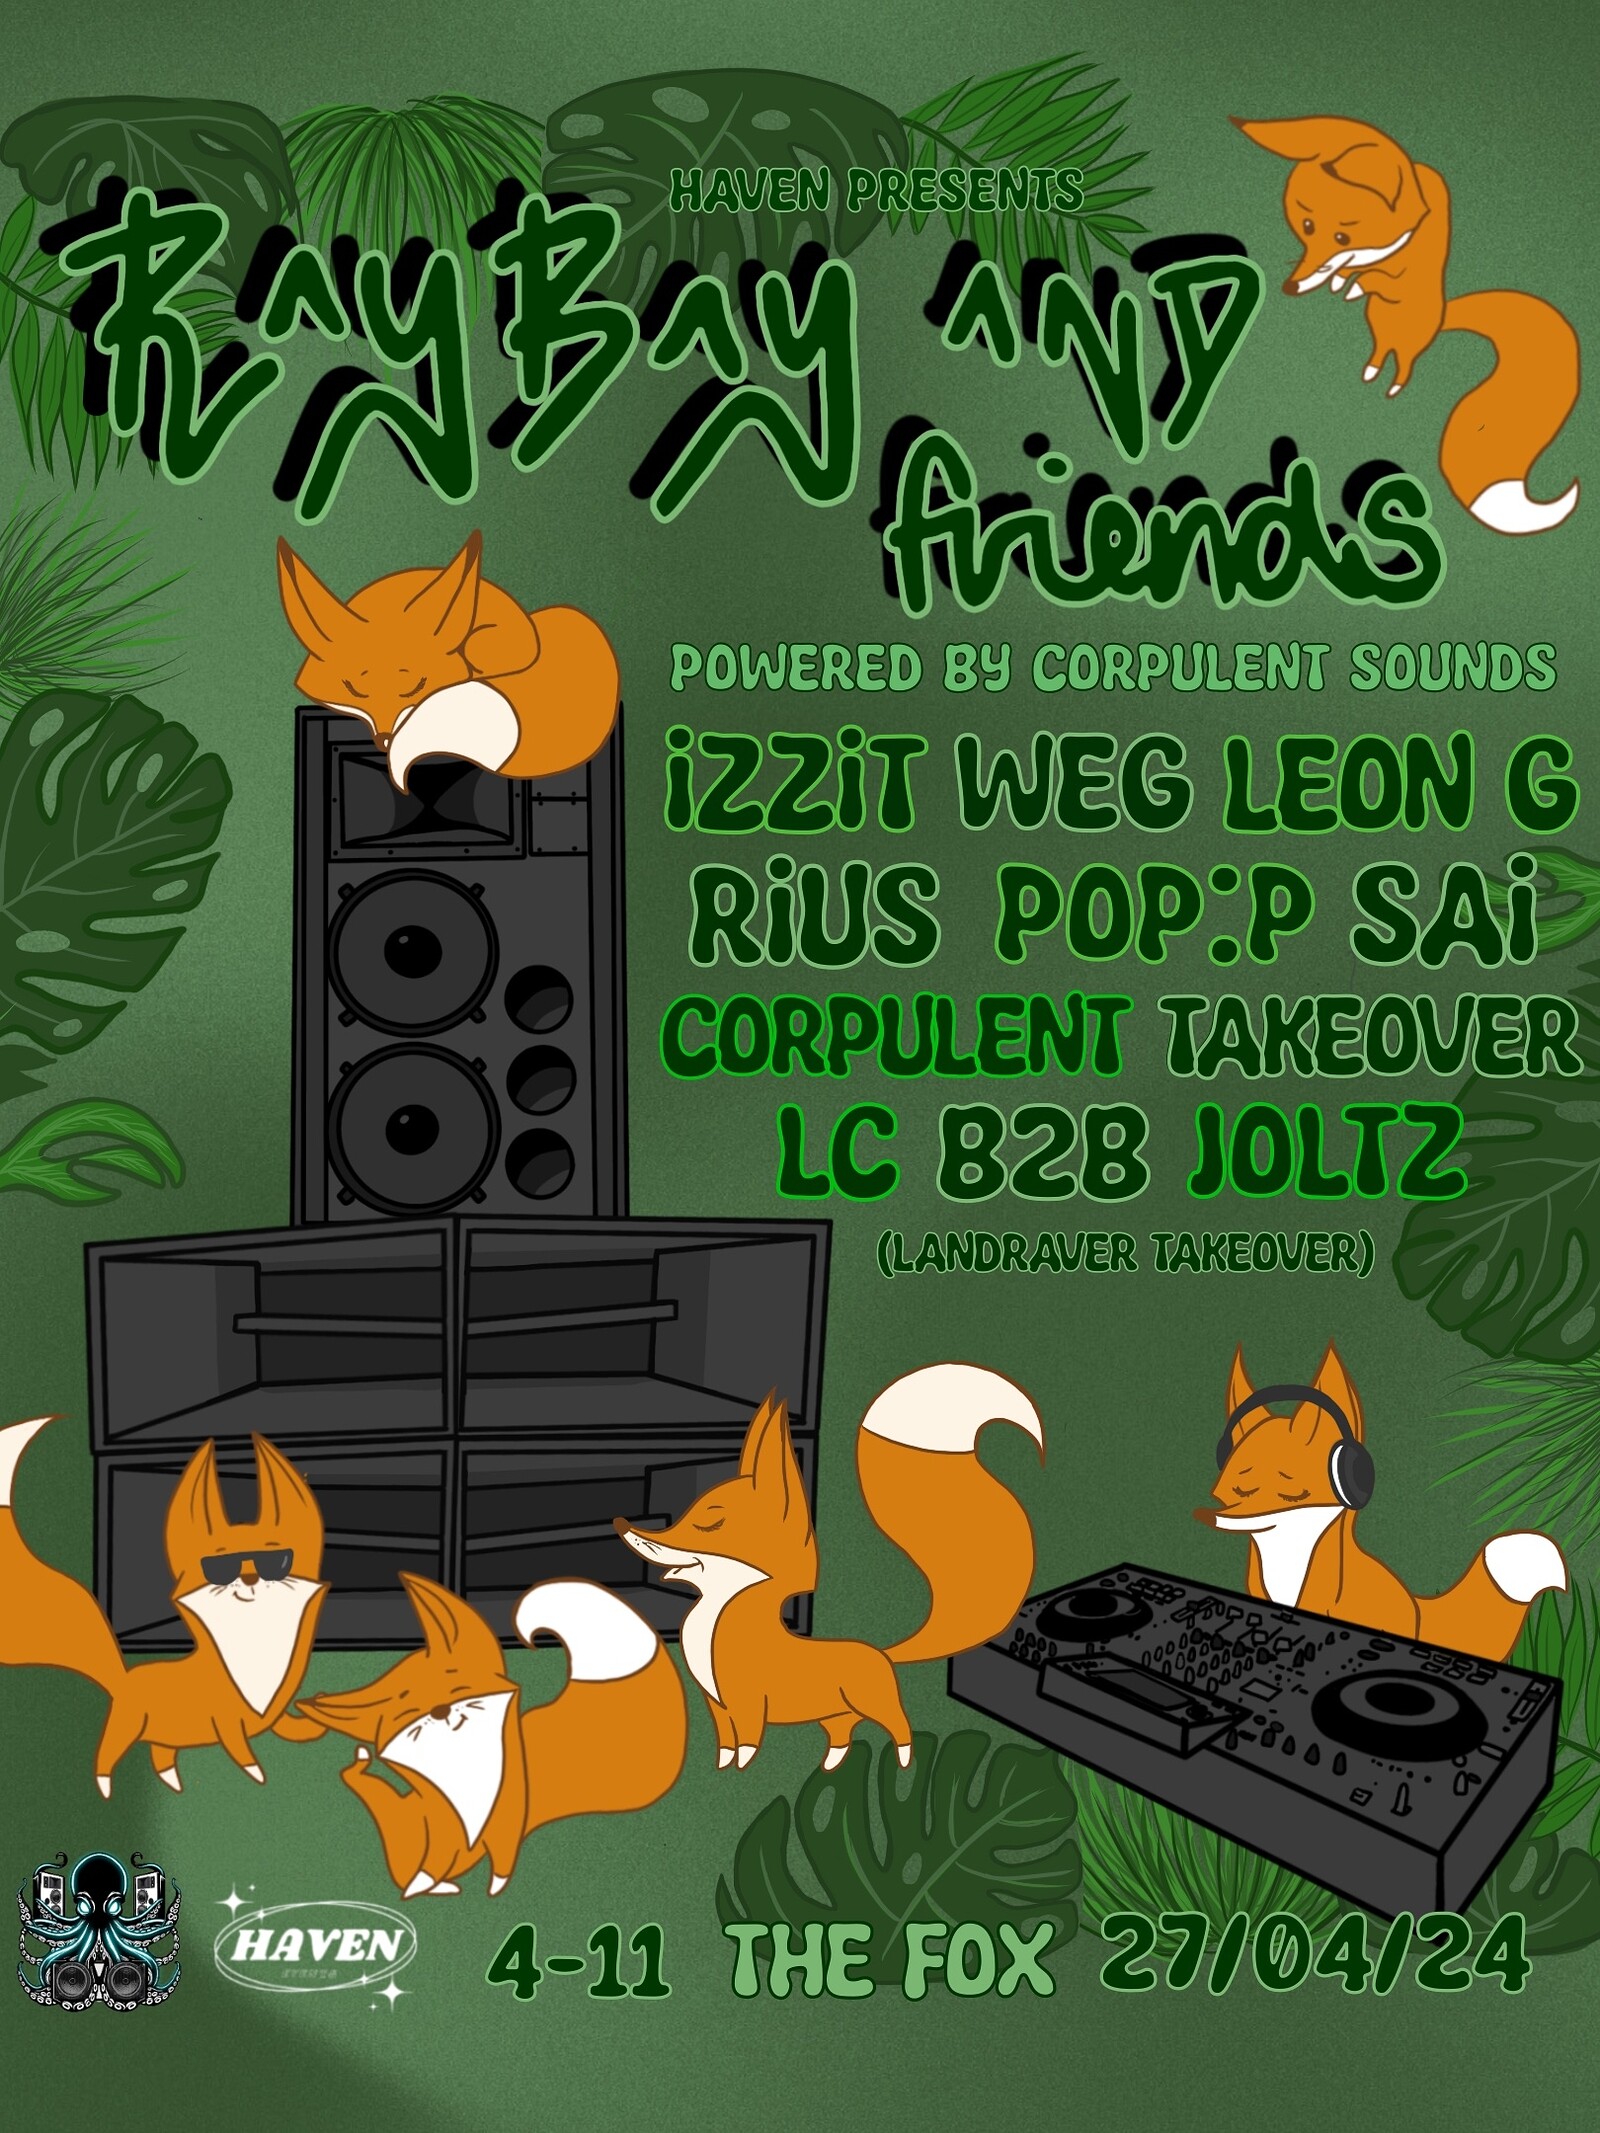 HAVEN PRESENTS: RAYBAY & FRIENDS at The Fox bar & Cafe